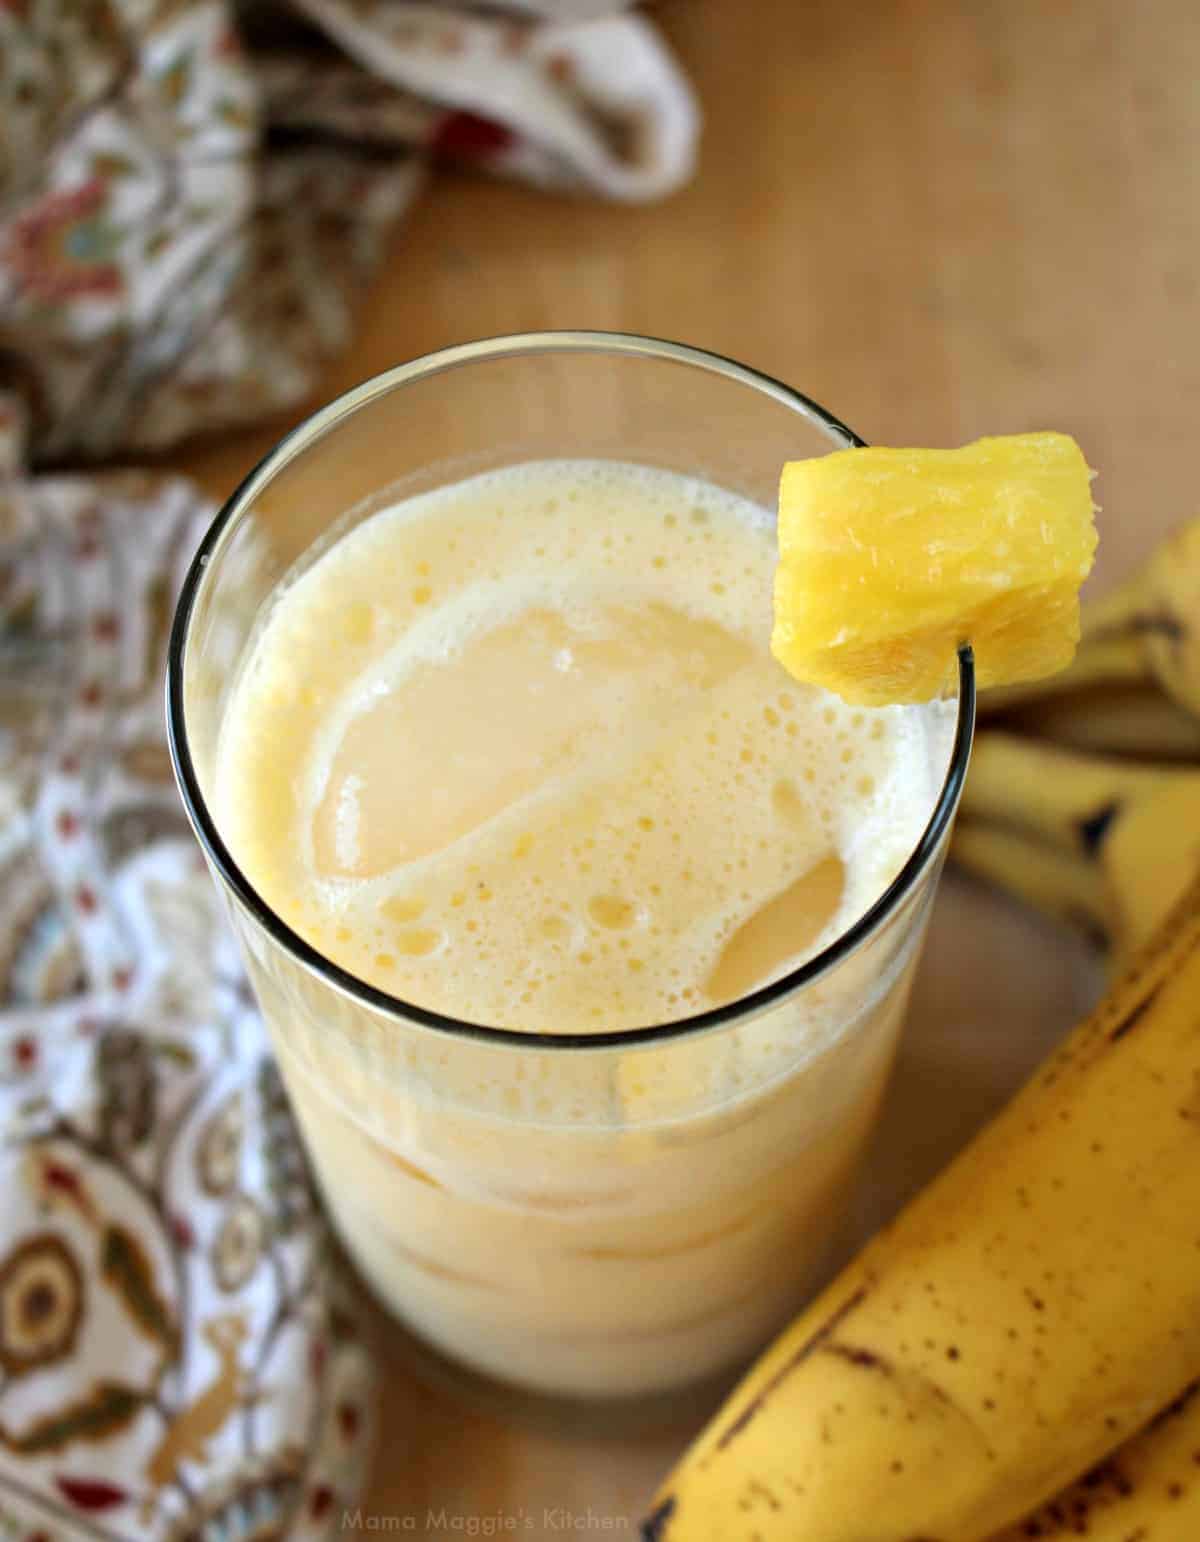 A glass of pineapple banana agua fresca decorated with a pineapple wedge and surrounded by bananas.